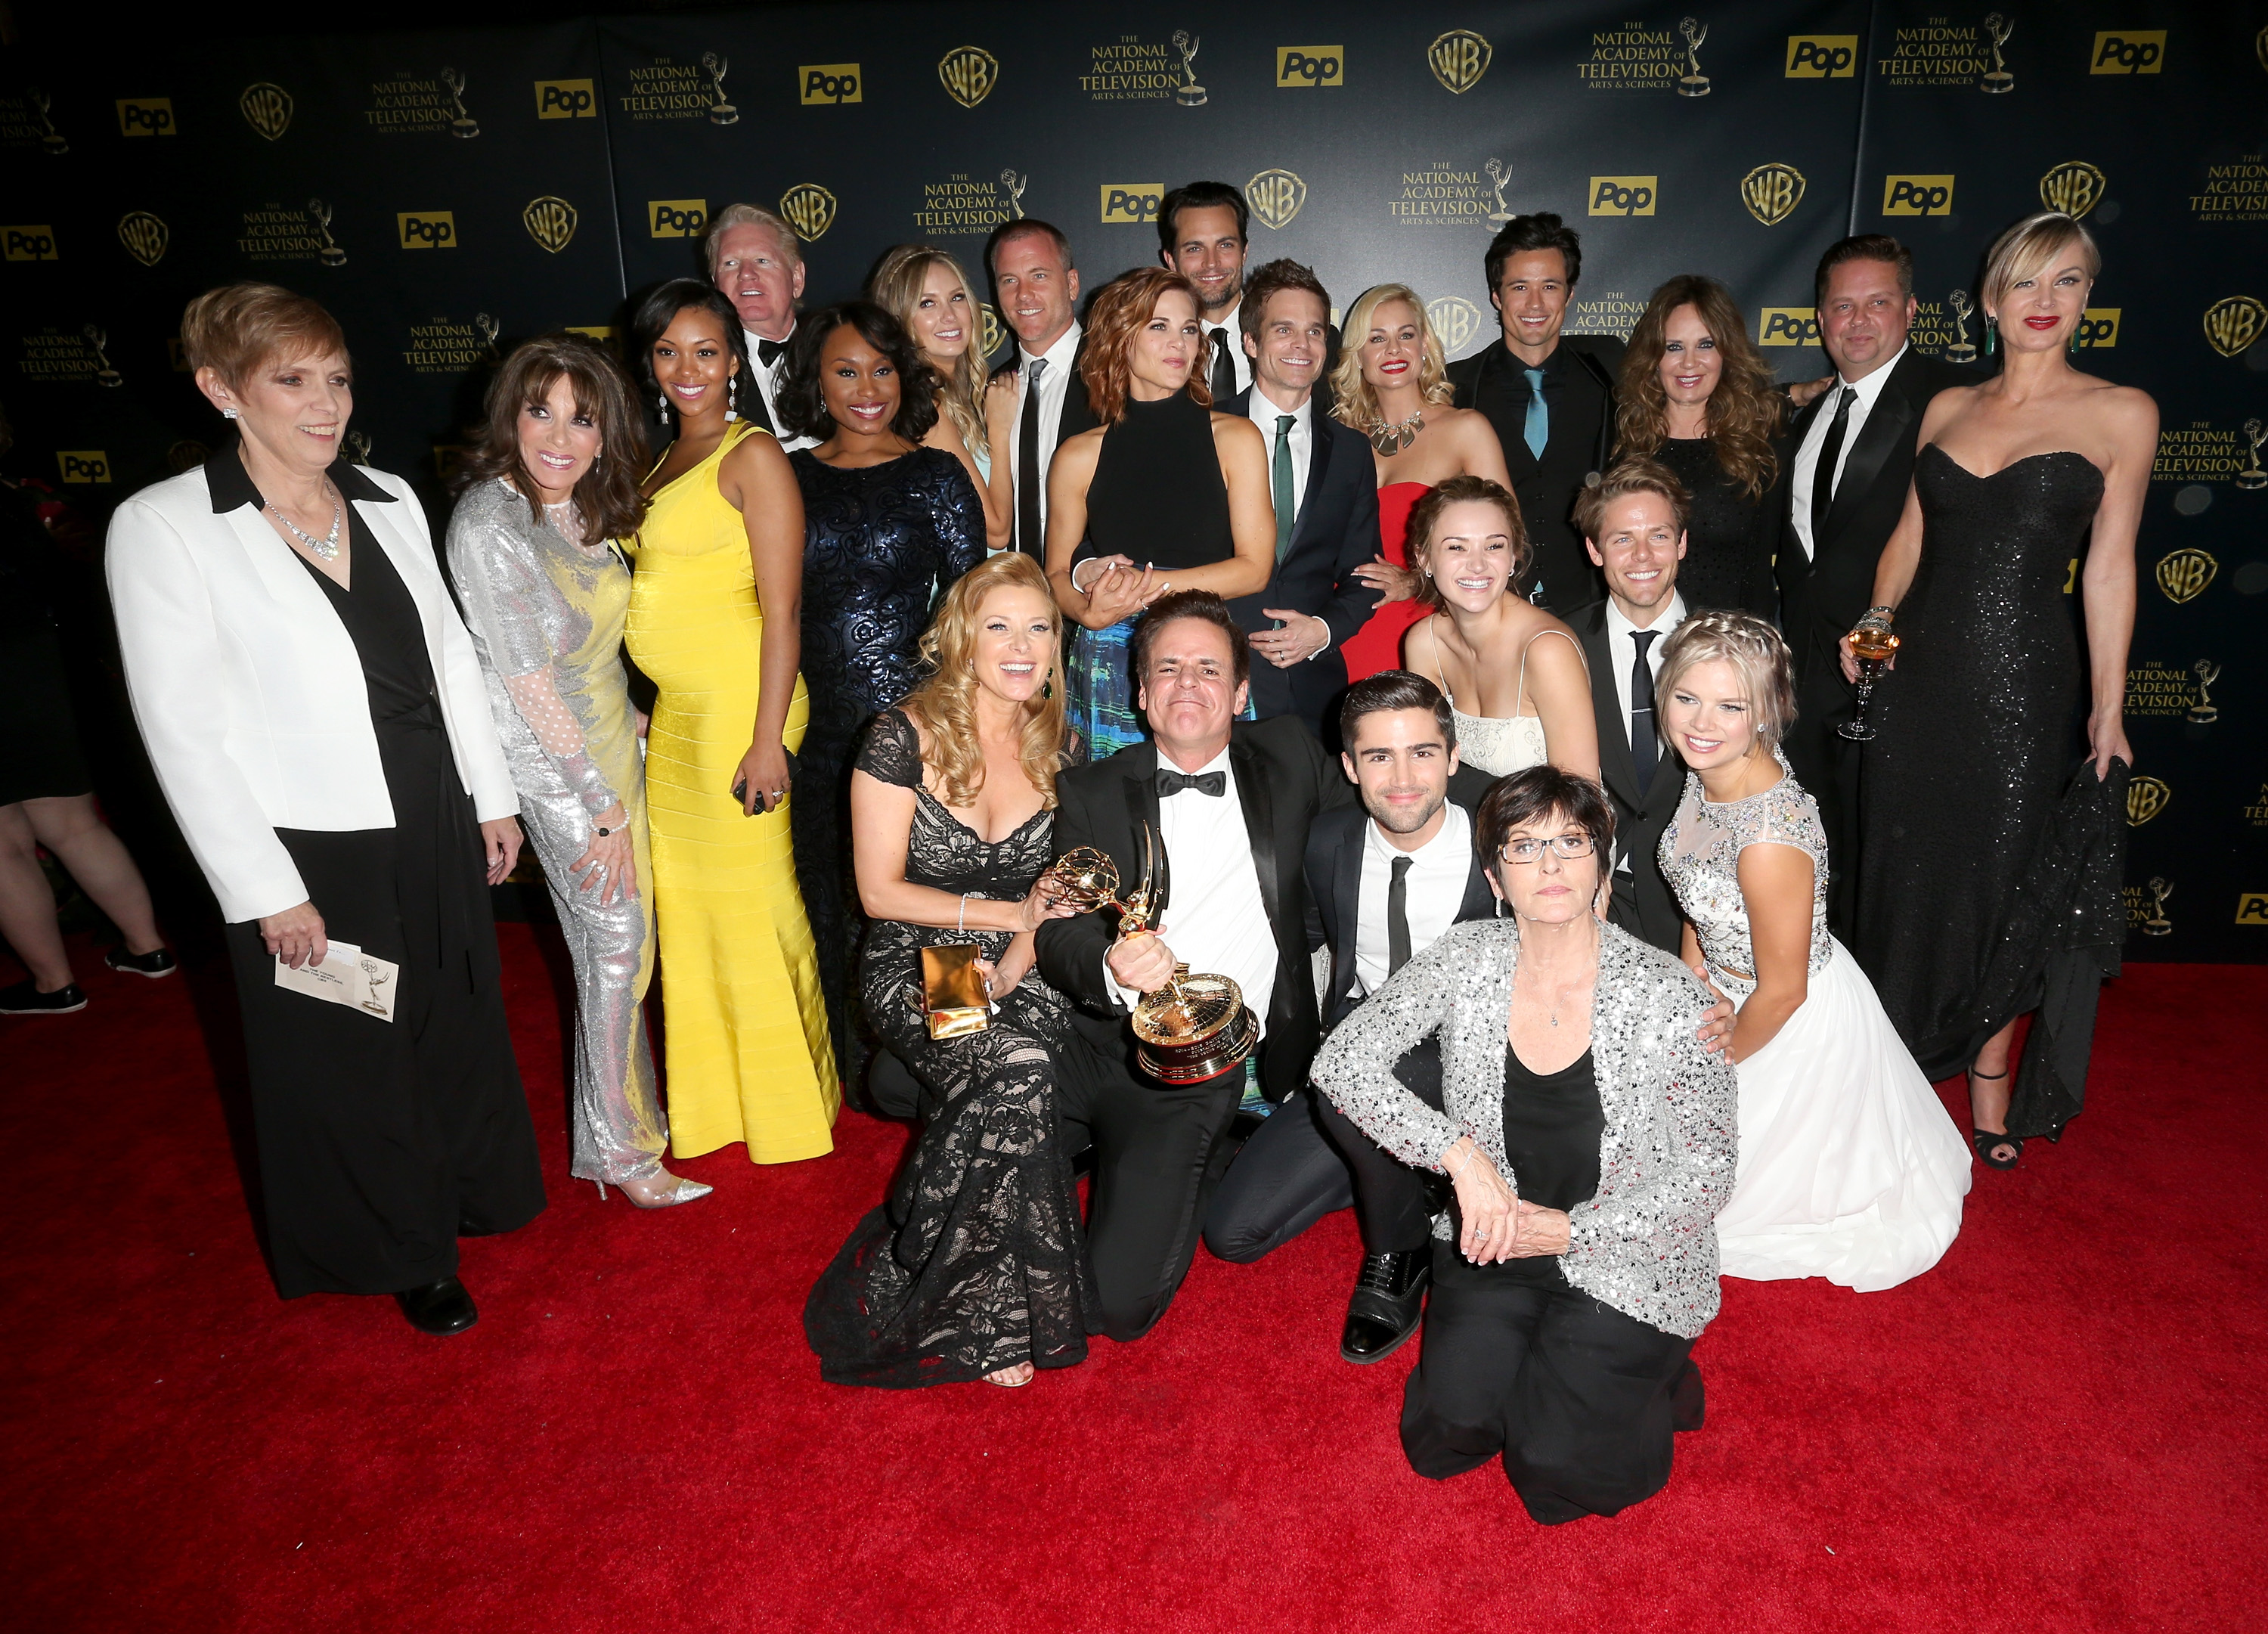 'The Young and the Restless' cast poses for a group photo on the red carpet of the 2015 Daytime Emmys.